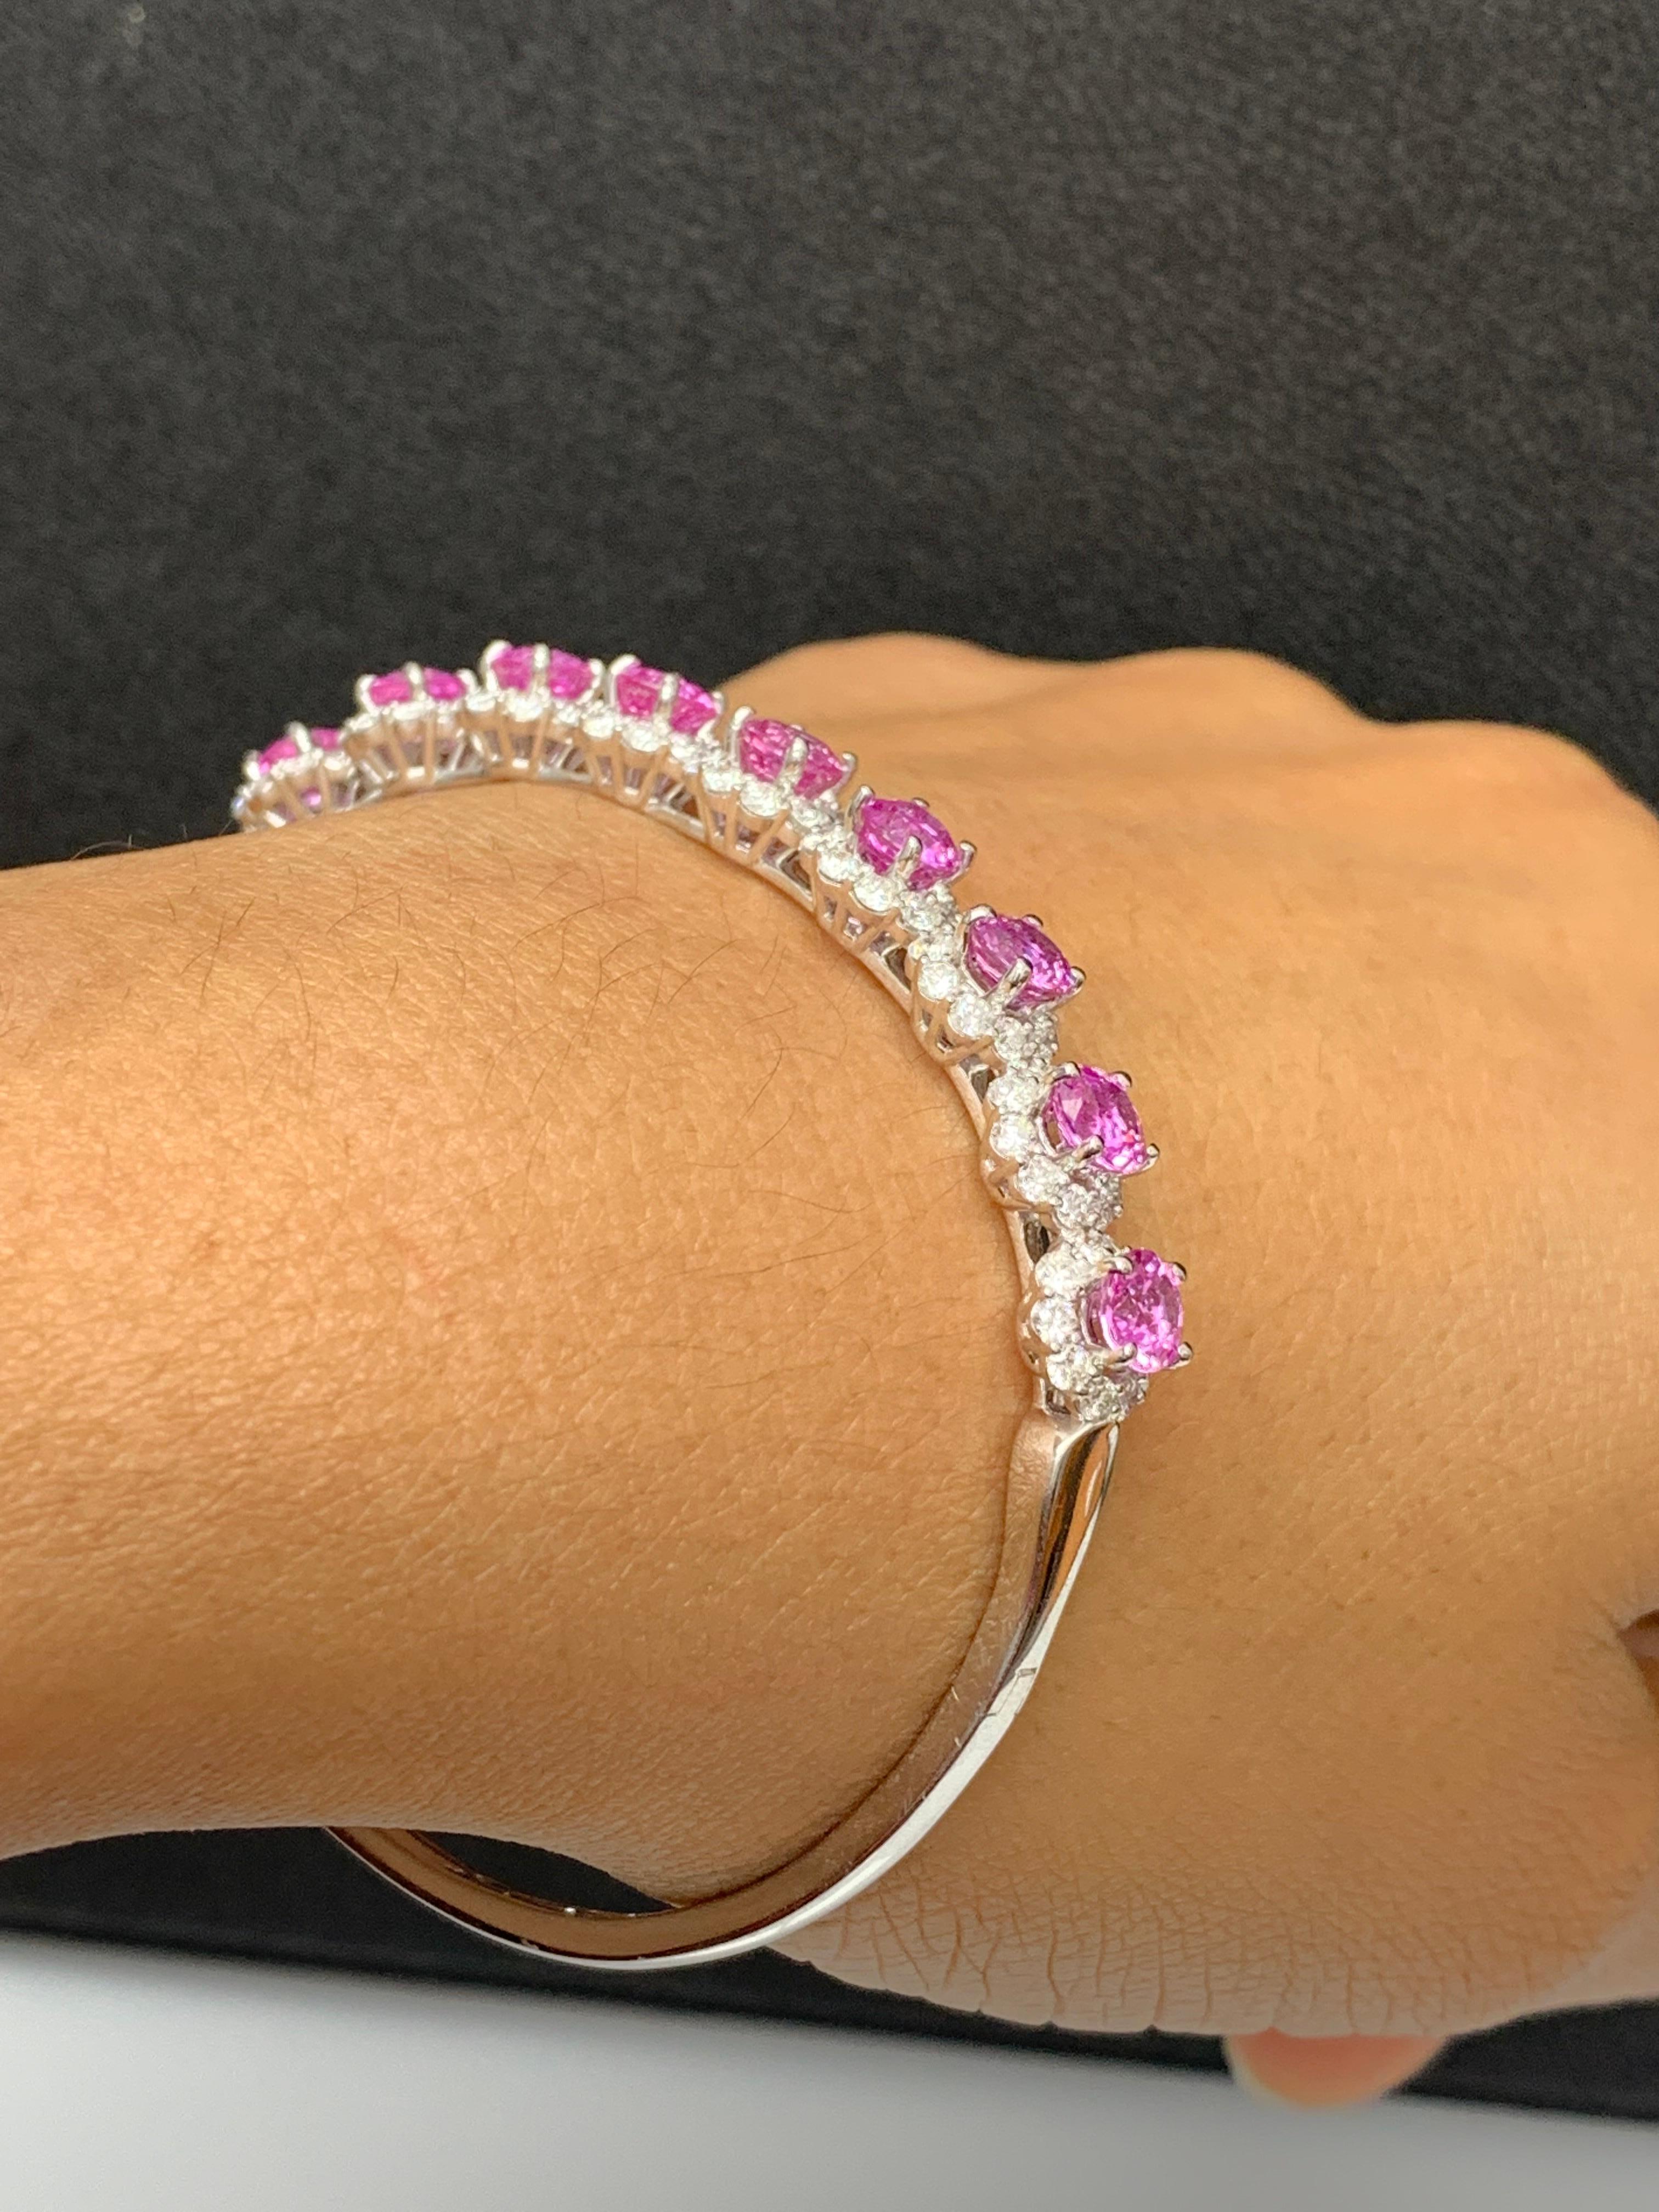 5.82 Carat Brilliant Cut Pink Sapphire Diamond Bangle Bracelet in 18k White Gold In New Condition For Sale In NEW YORK, NY